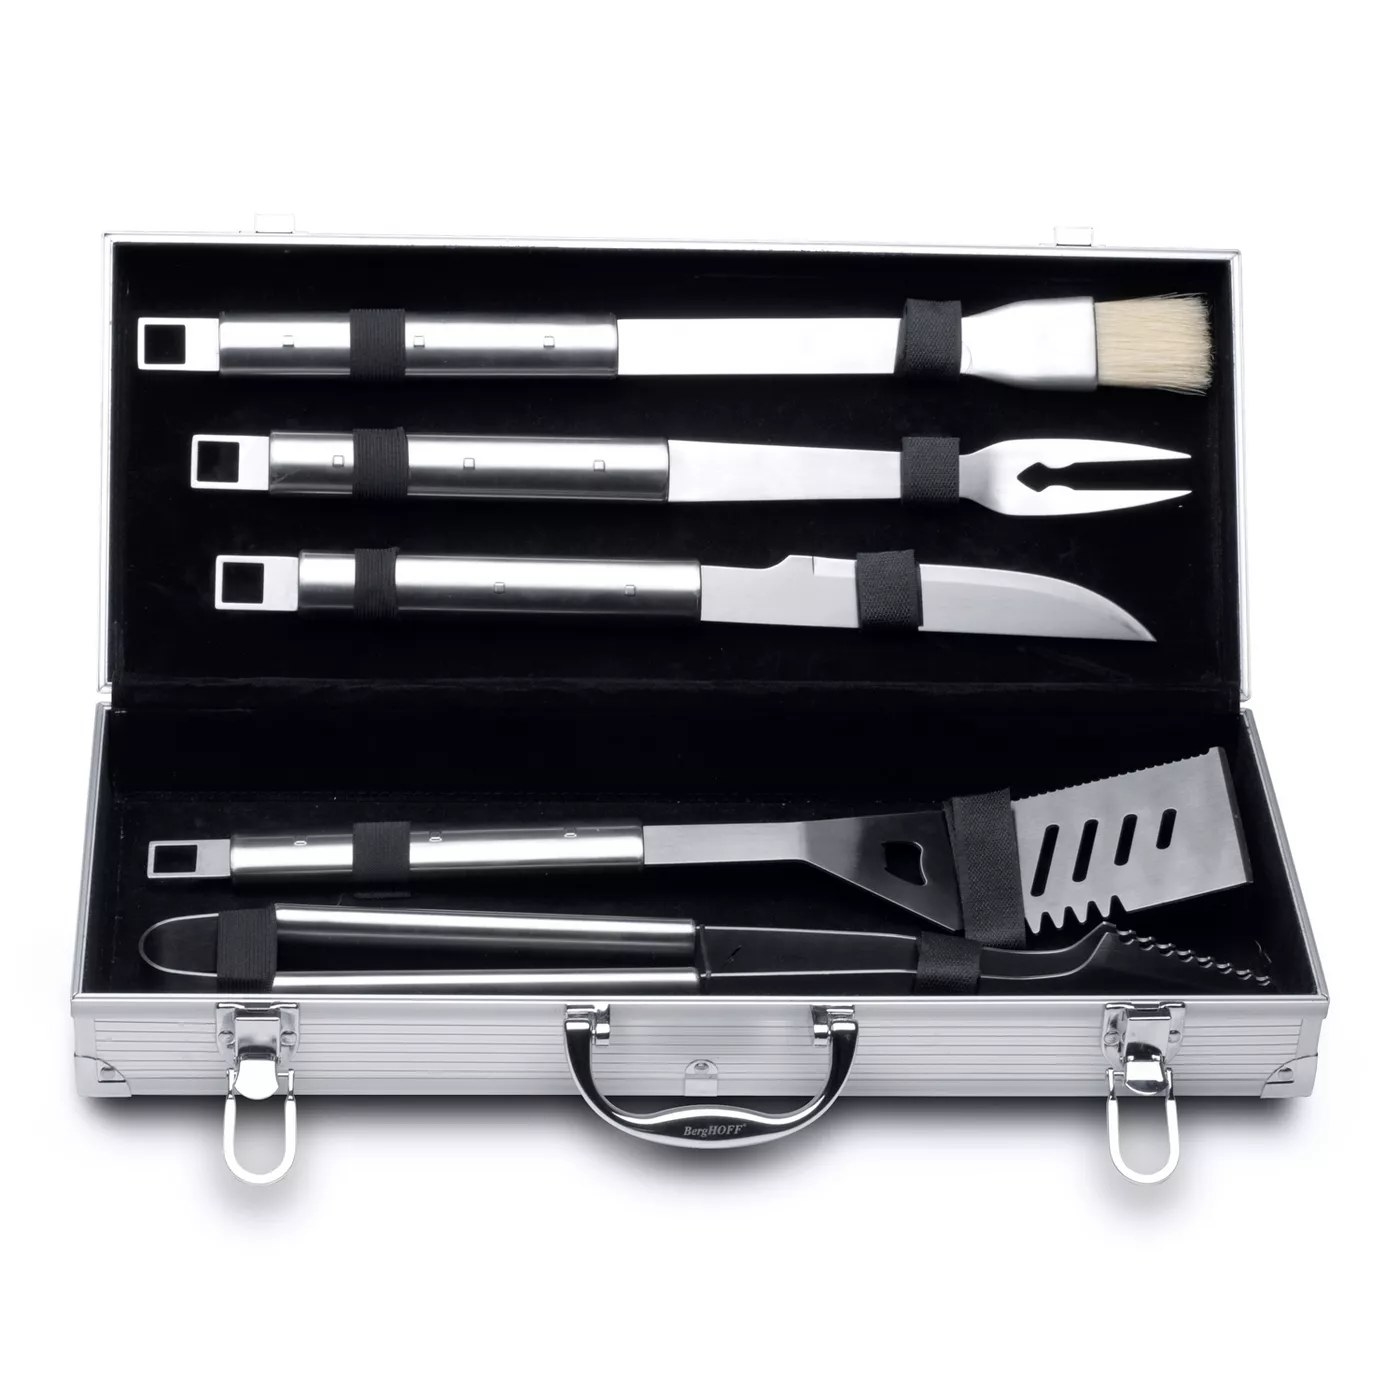 The small brush, barbecue knife, slotted turner, meat fork, tongs, and aluminum carving case